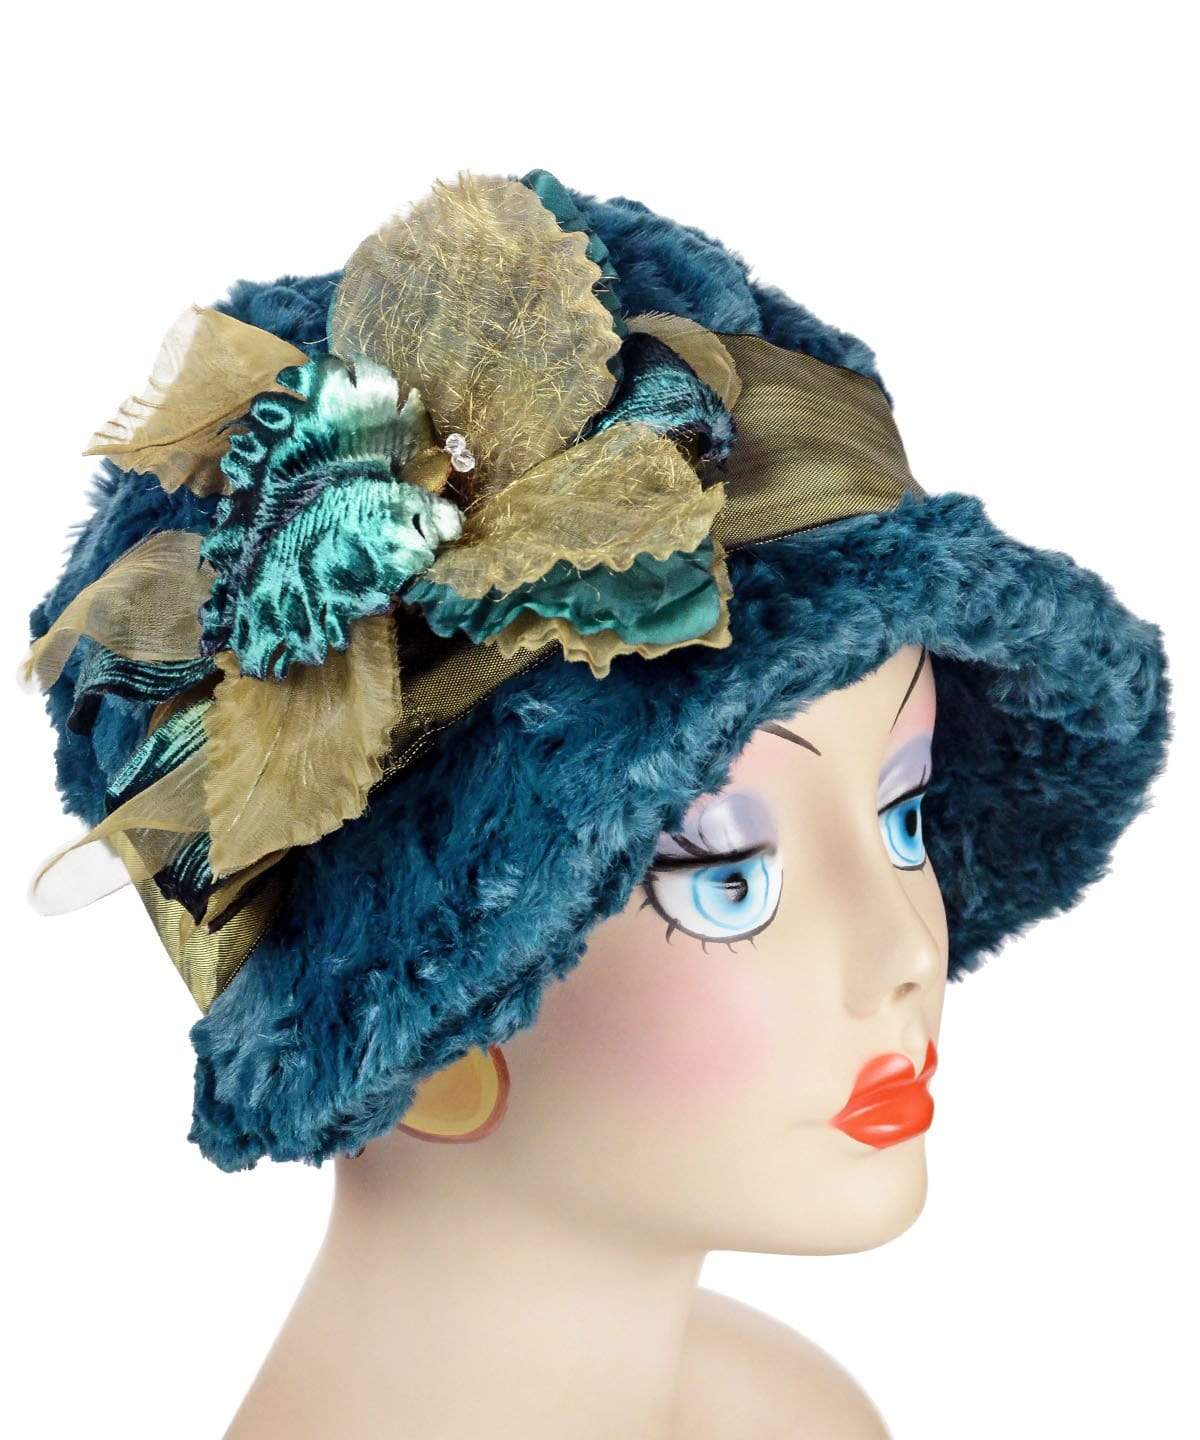 Sideview of Grace Cloche 1920s Hat Style in Peacock Pond Faux Fur with Green Velvet and Organdy Flowers | By Pandemonium Millinery | Handmade in Seattle WA USA